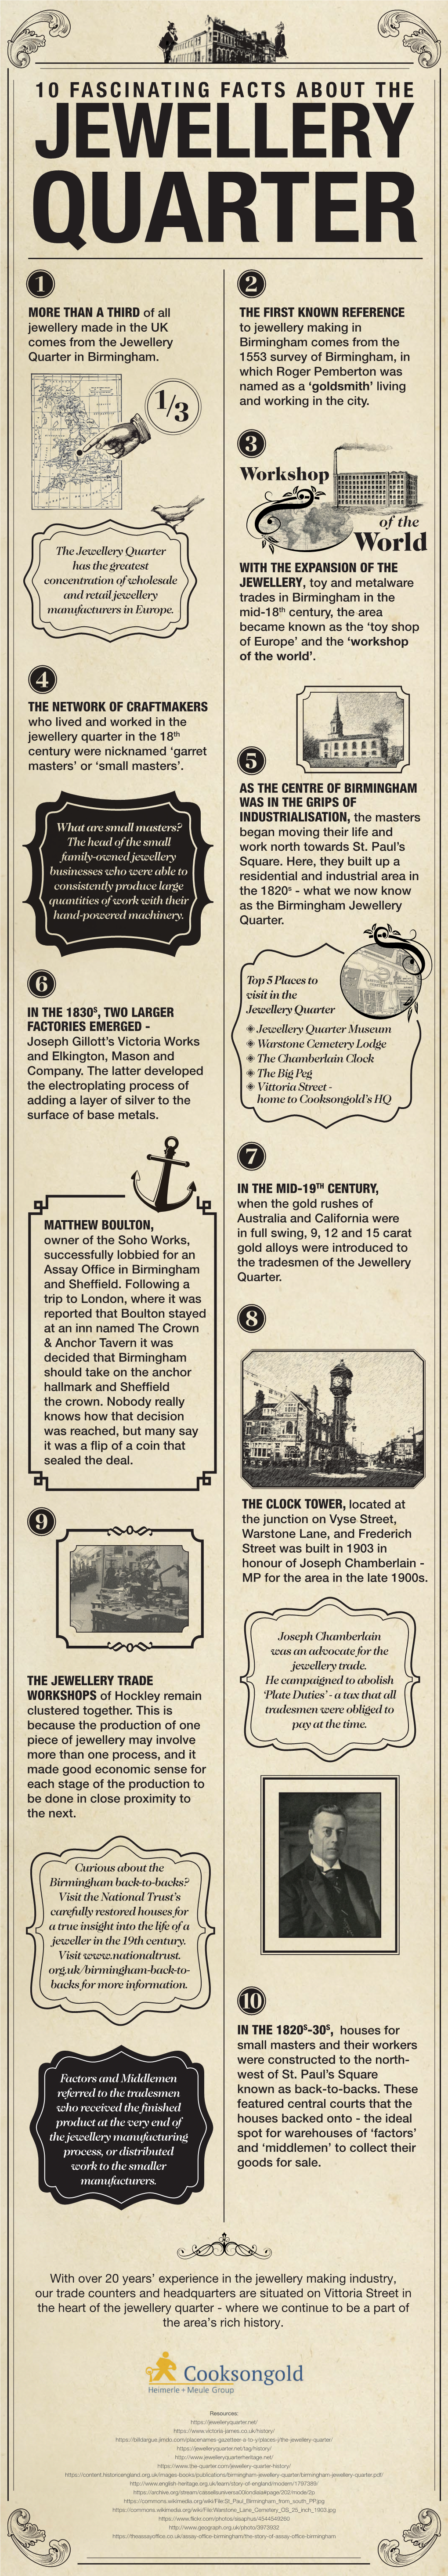 10 Fascinating Facts About the Jewellery Quarter